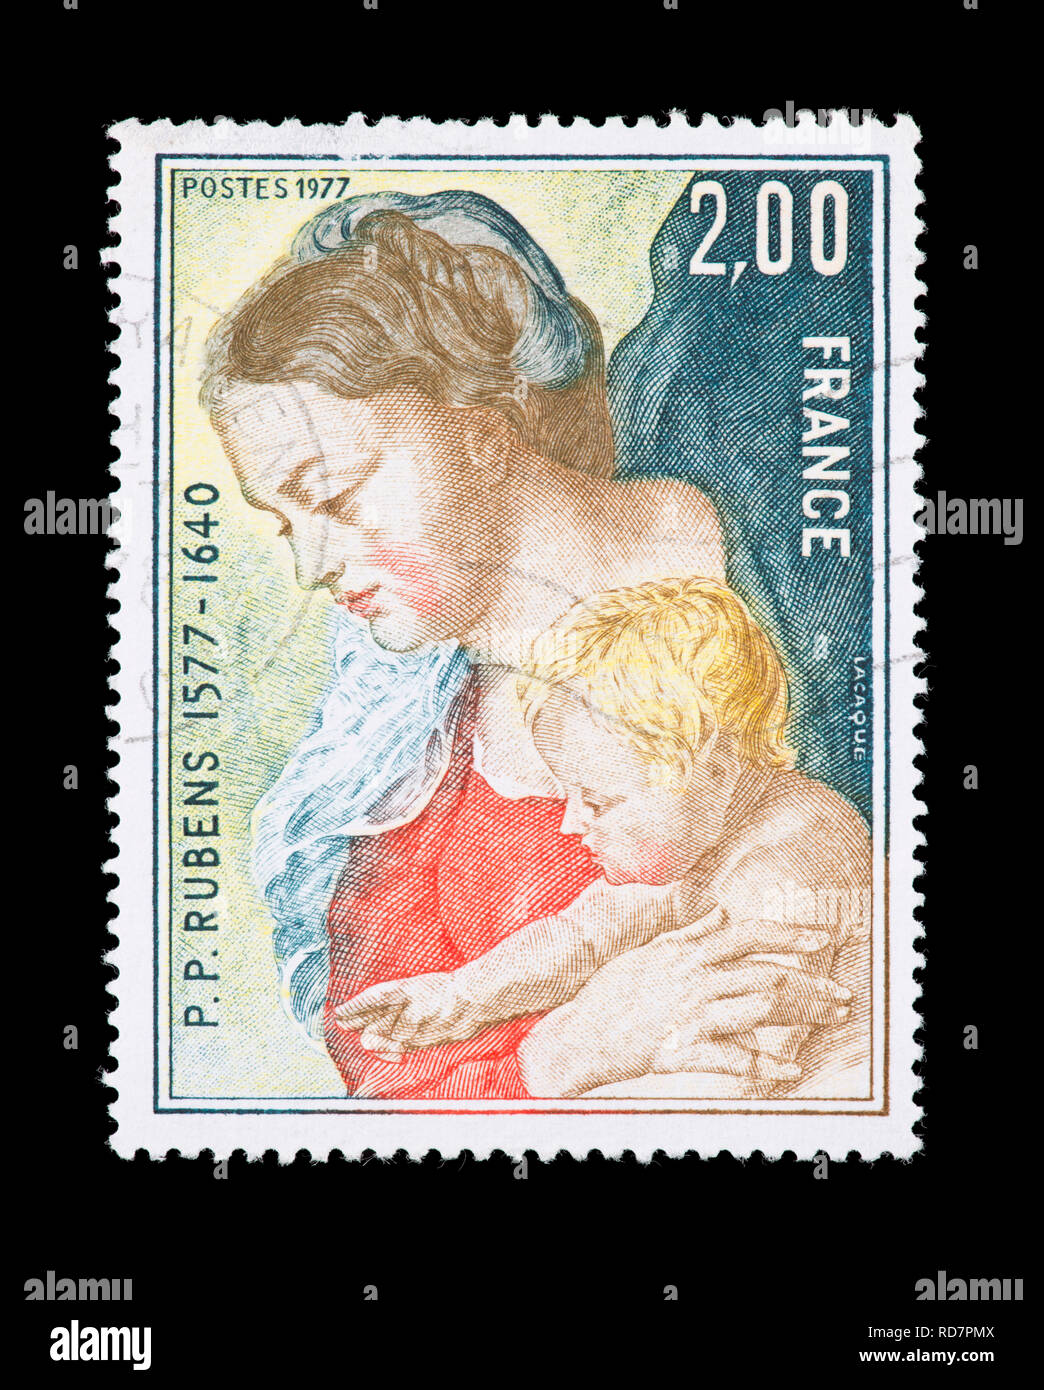 Postage stamp fro France depicting the Rubens painting 'Virgin and Child' Stock Photo